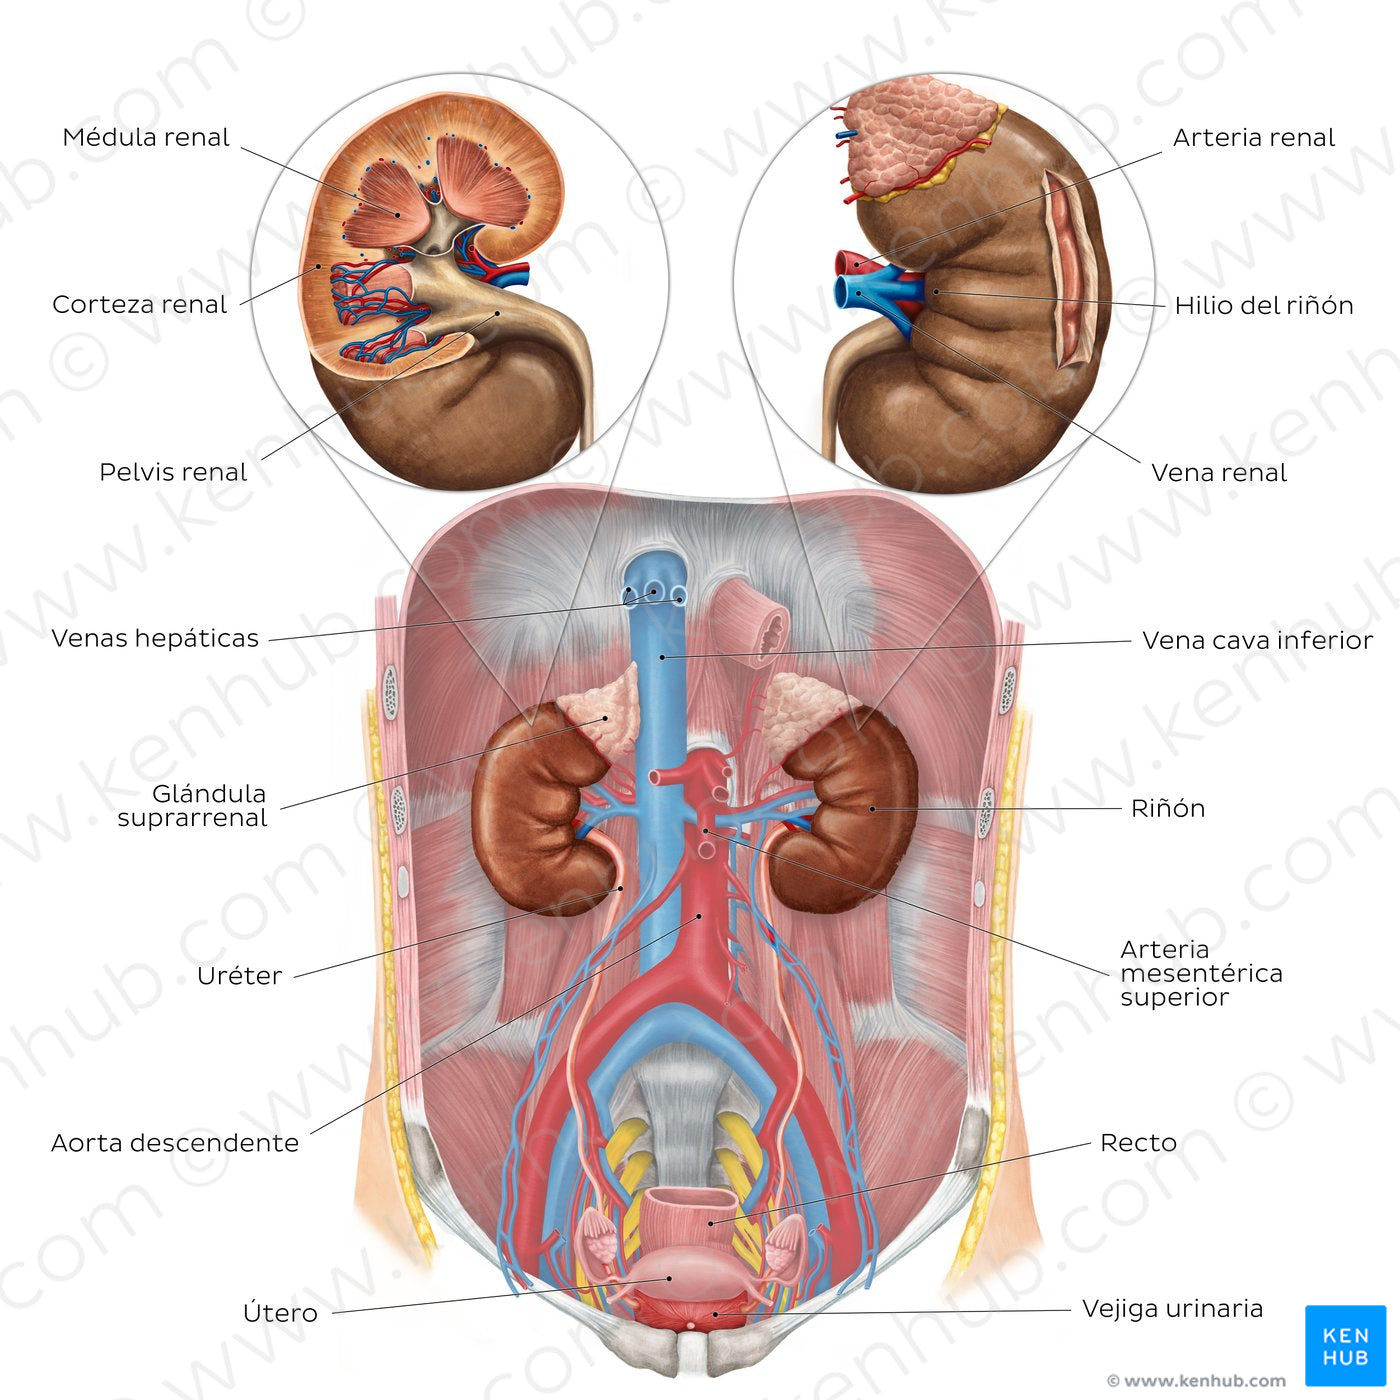 Urinary system - Overview (Spanish)